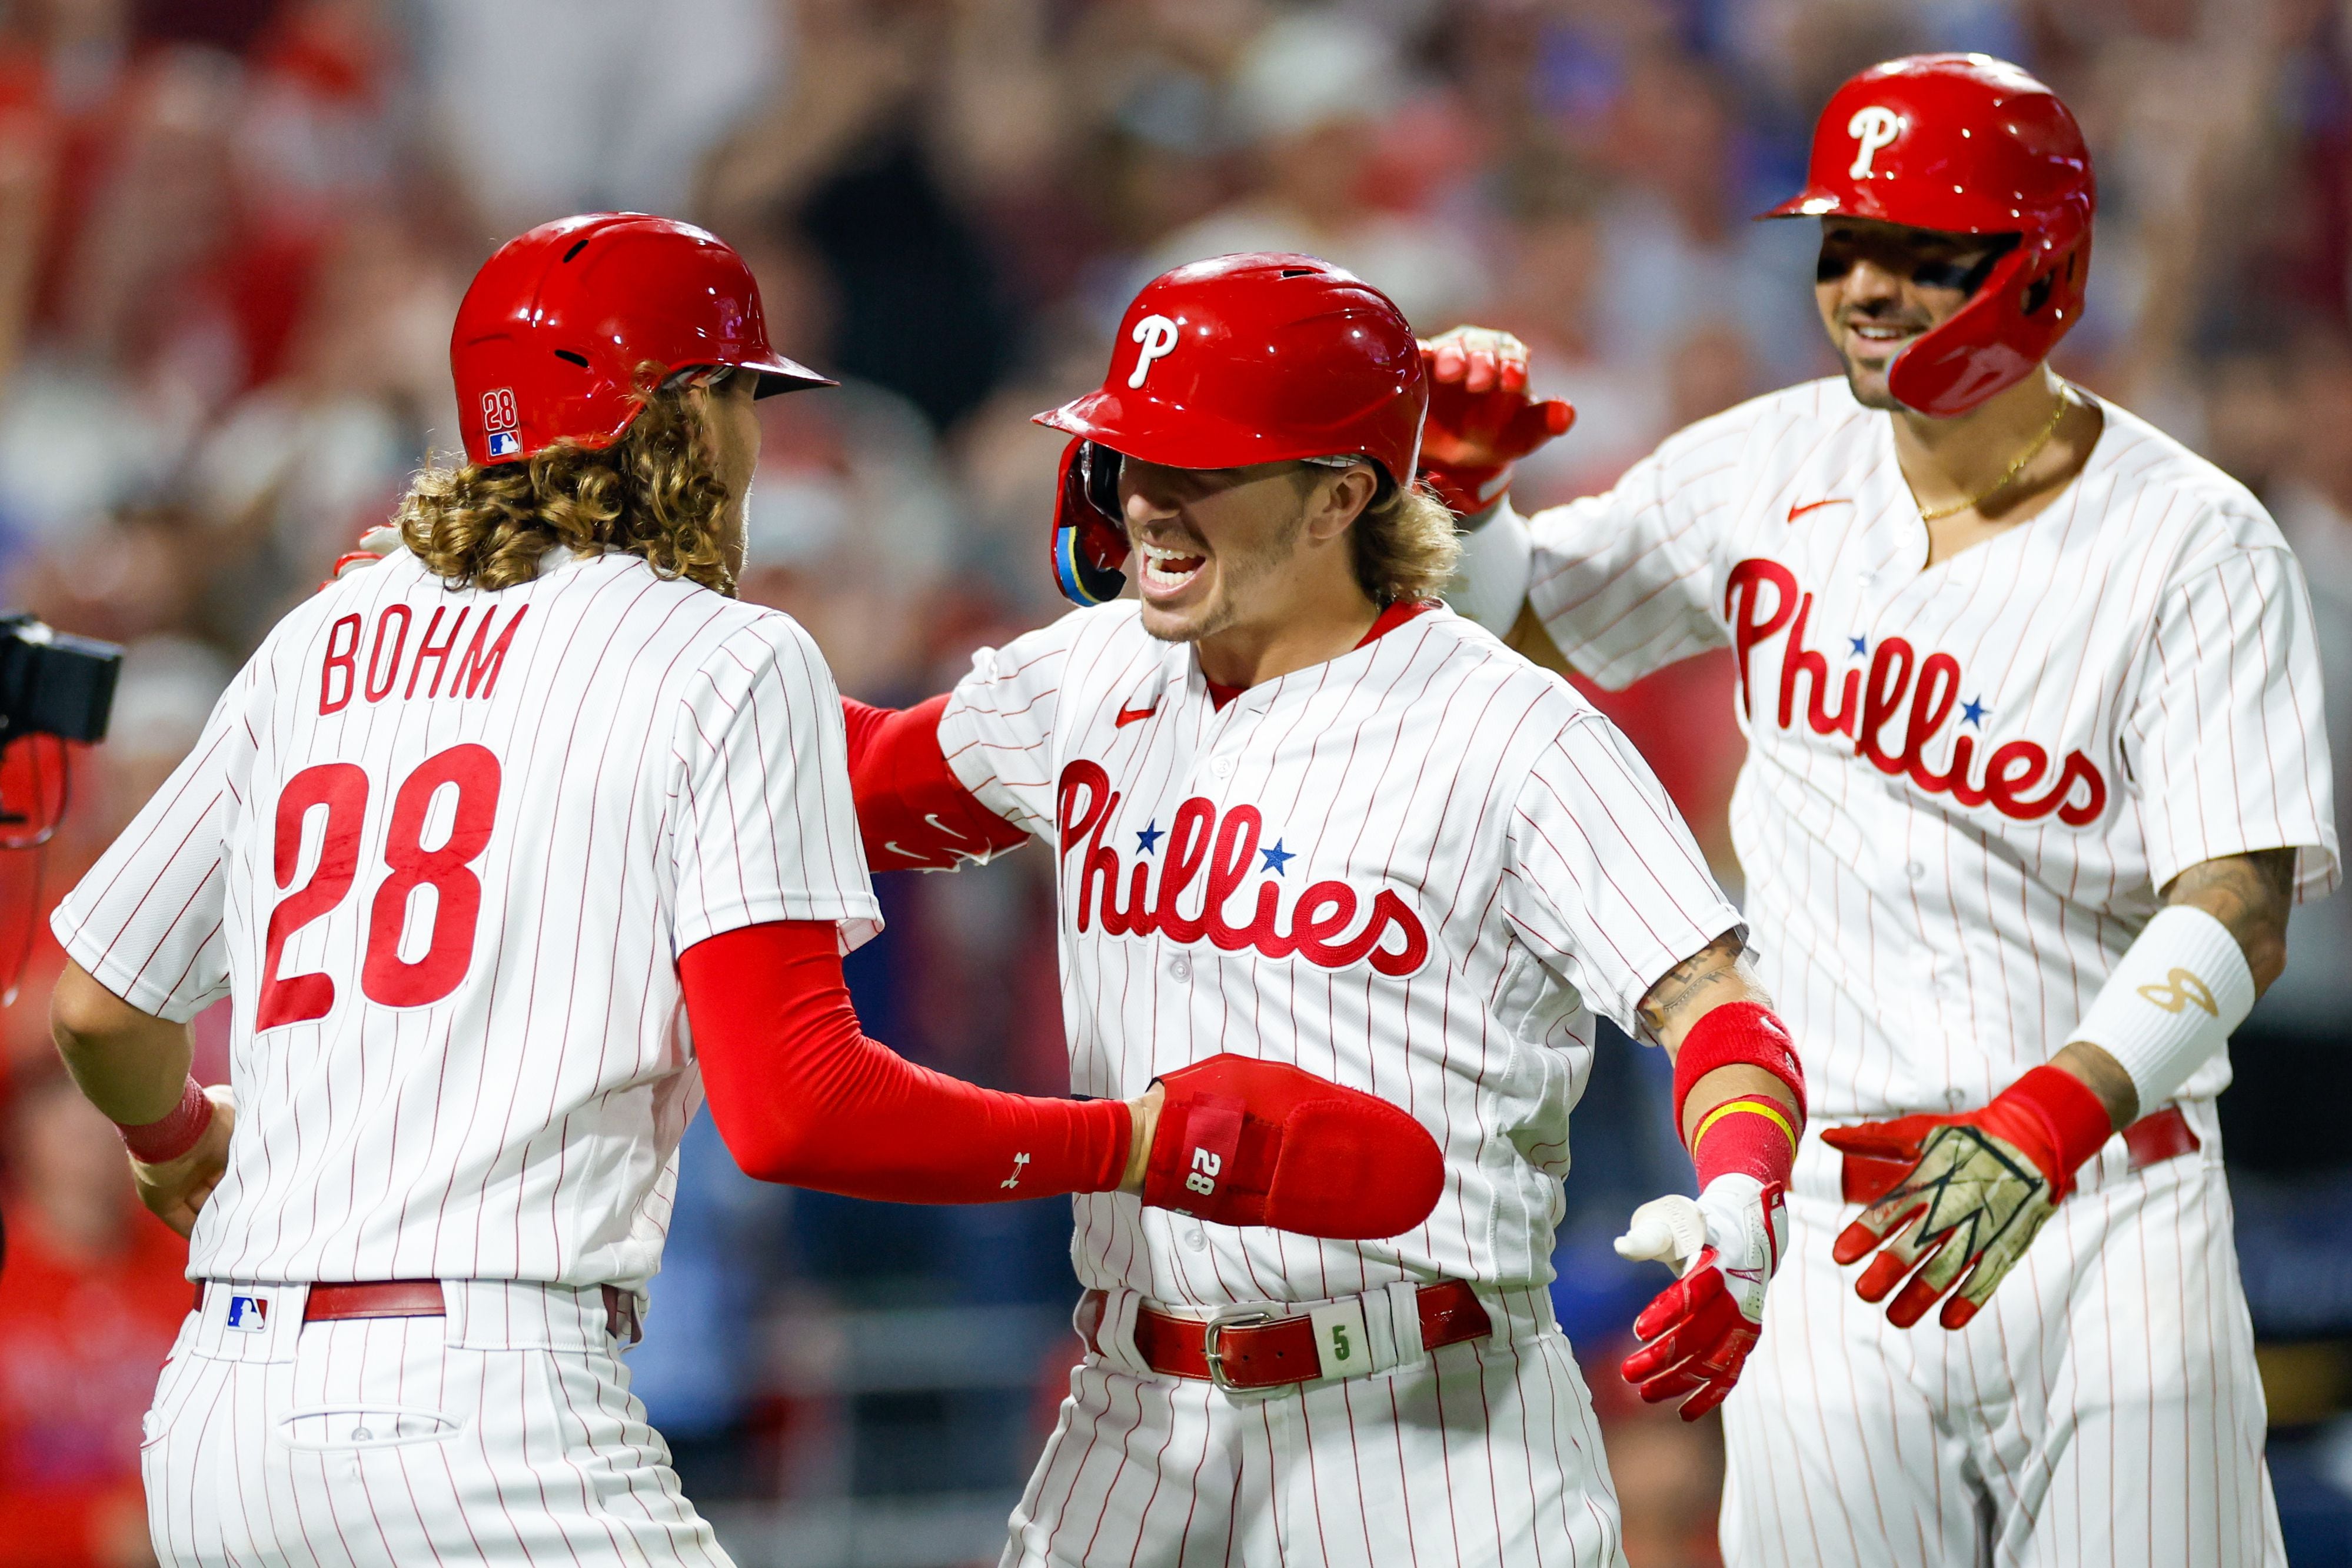 Phillies' Walker shuts down Marlins, becomes MLB's first pitcher with